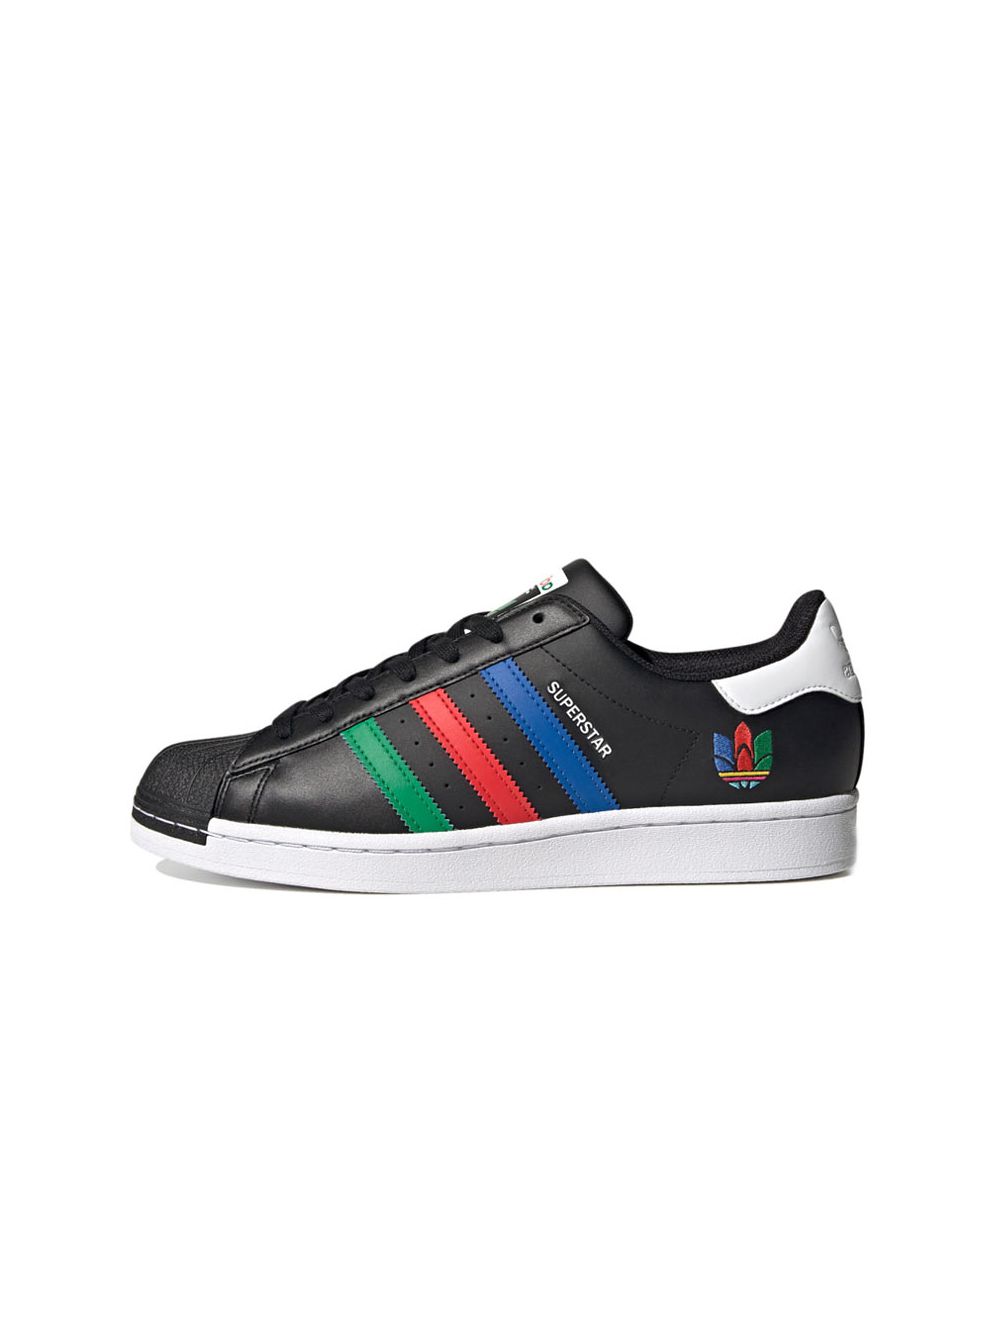 adidas superstar shoes black red yellow green